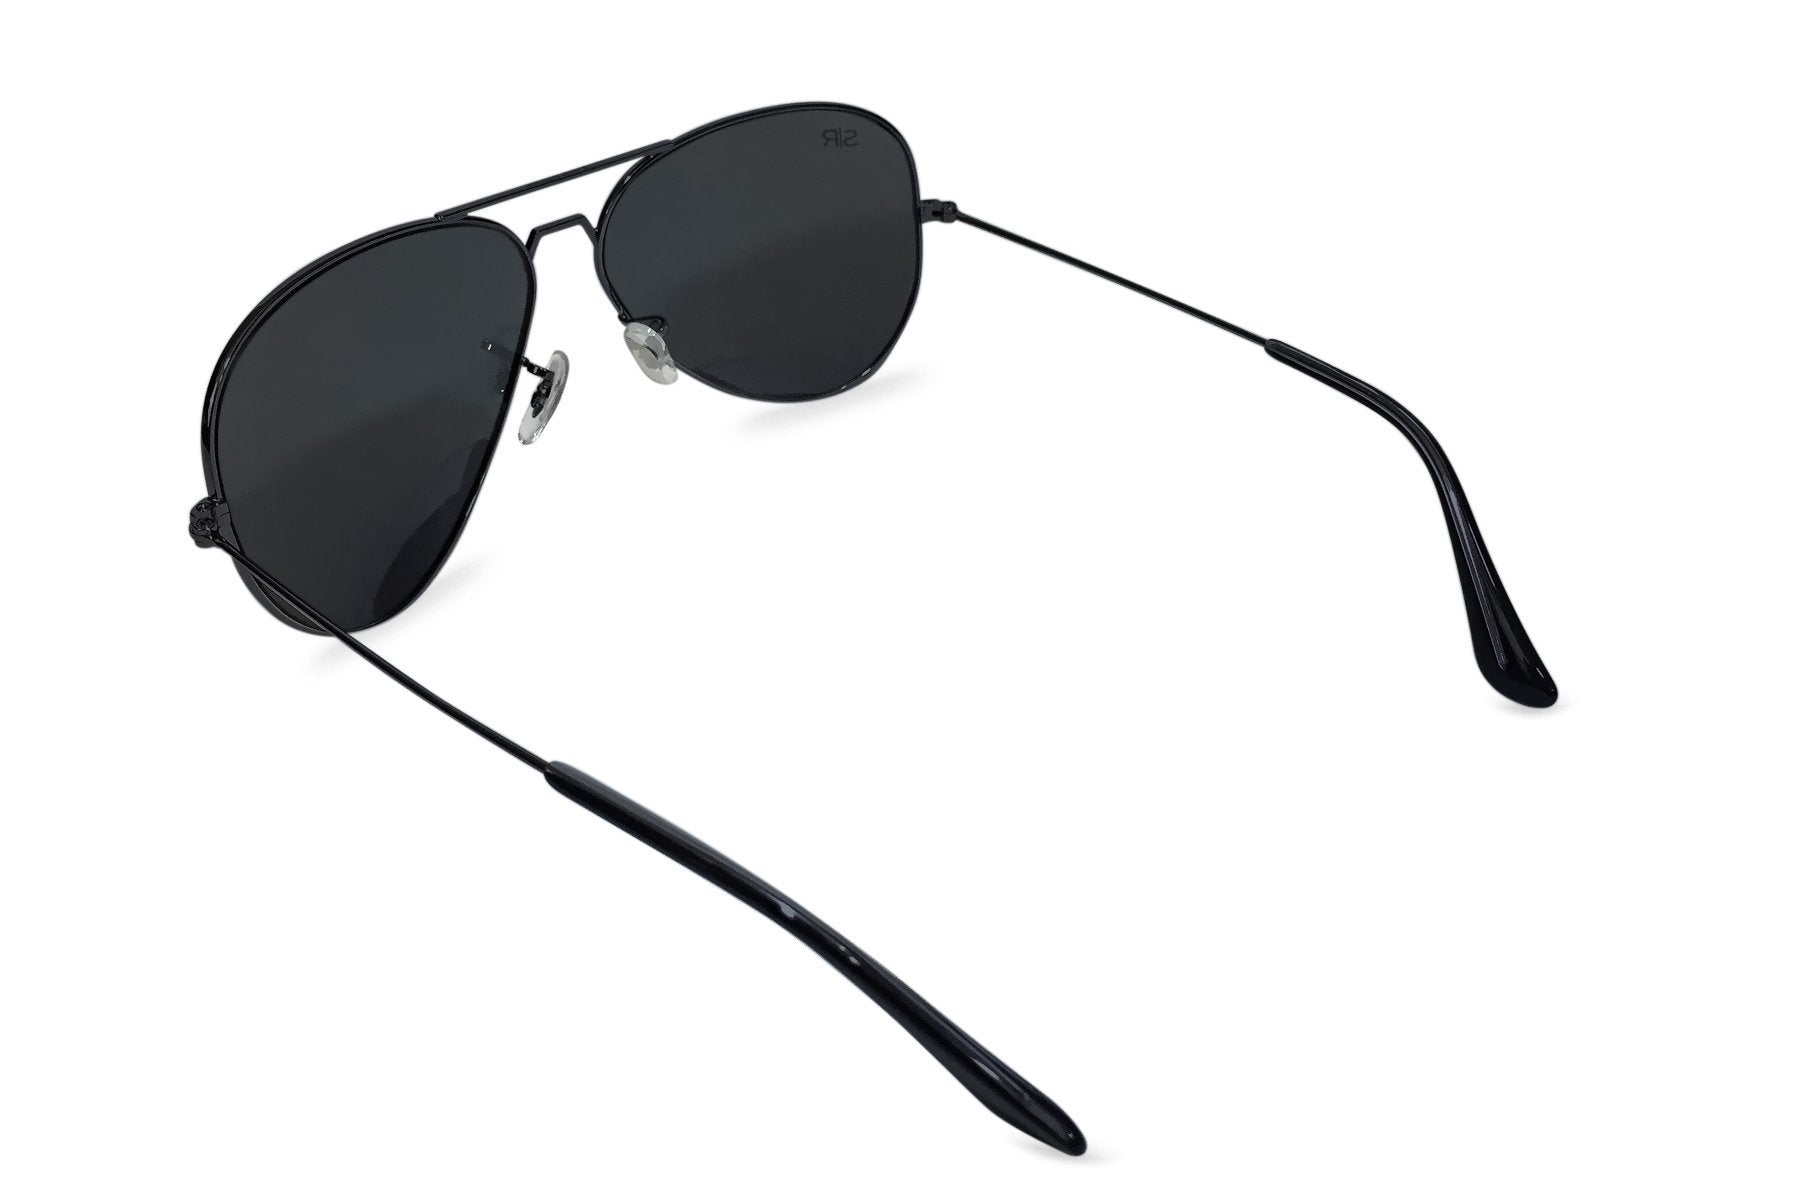 Aviator - Black Stealth Polarized Sunglasses | Gloss Black Sunglasses | Best Christmas Gifts | Gifts for The Holidays | Unique Gifts for Friends